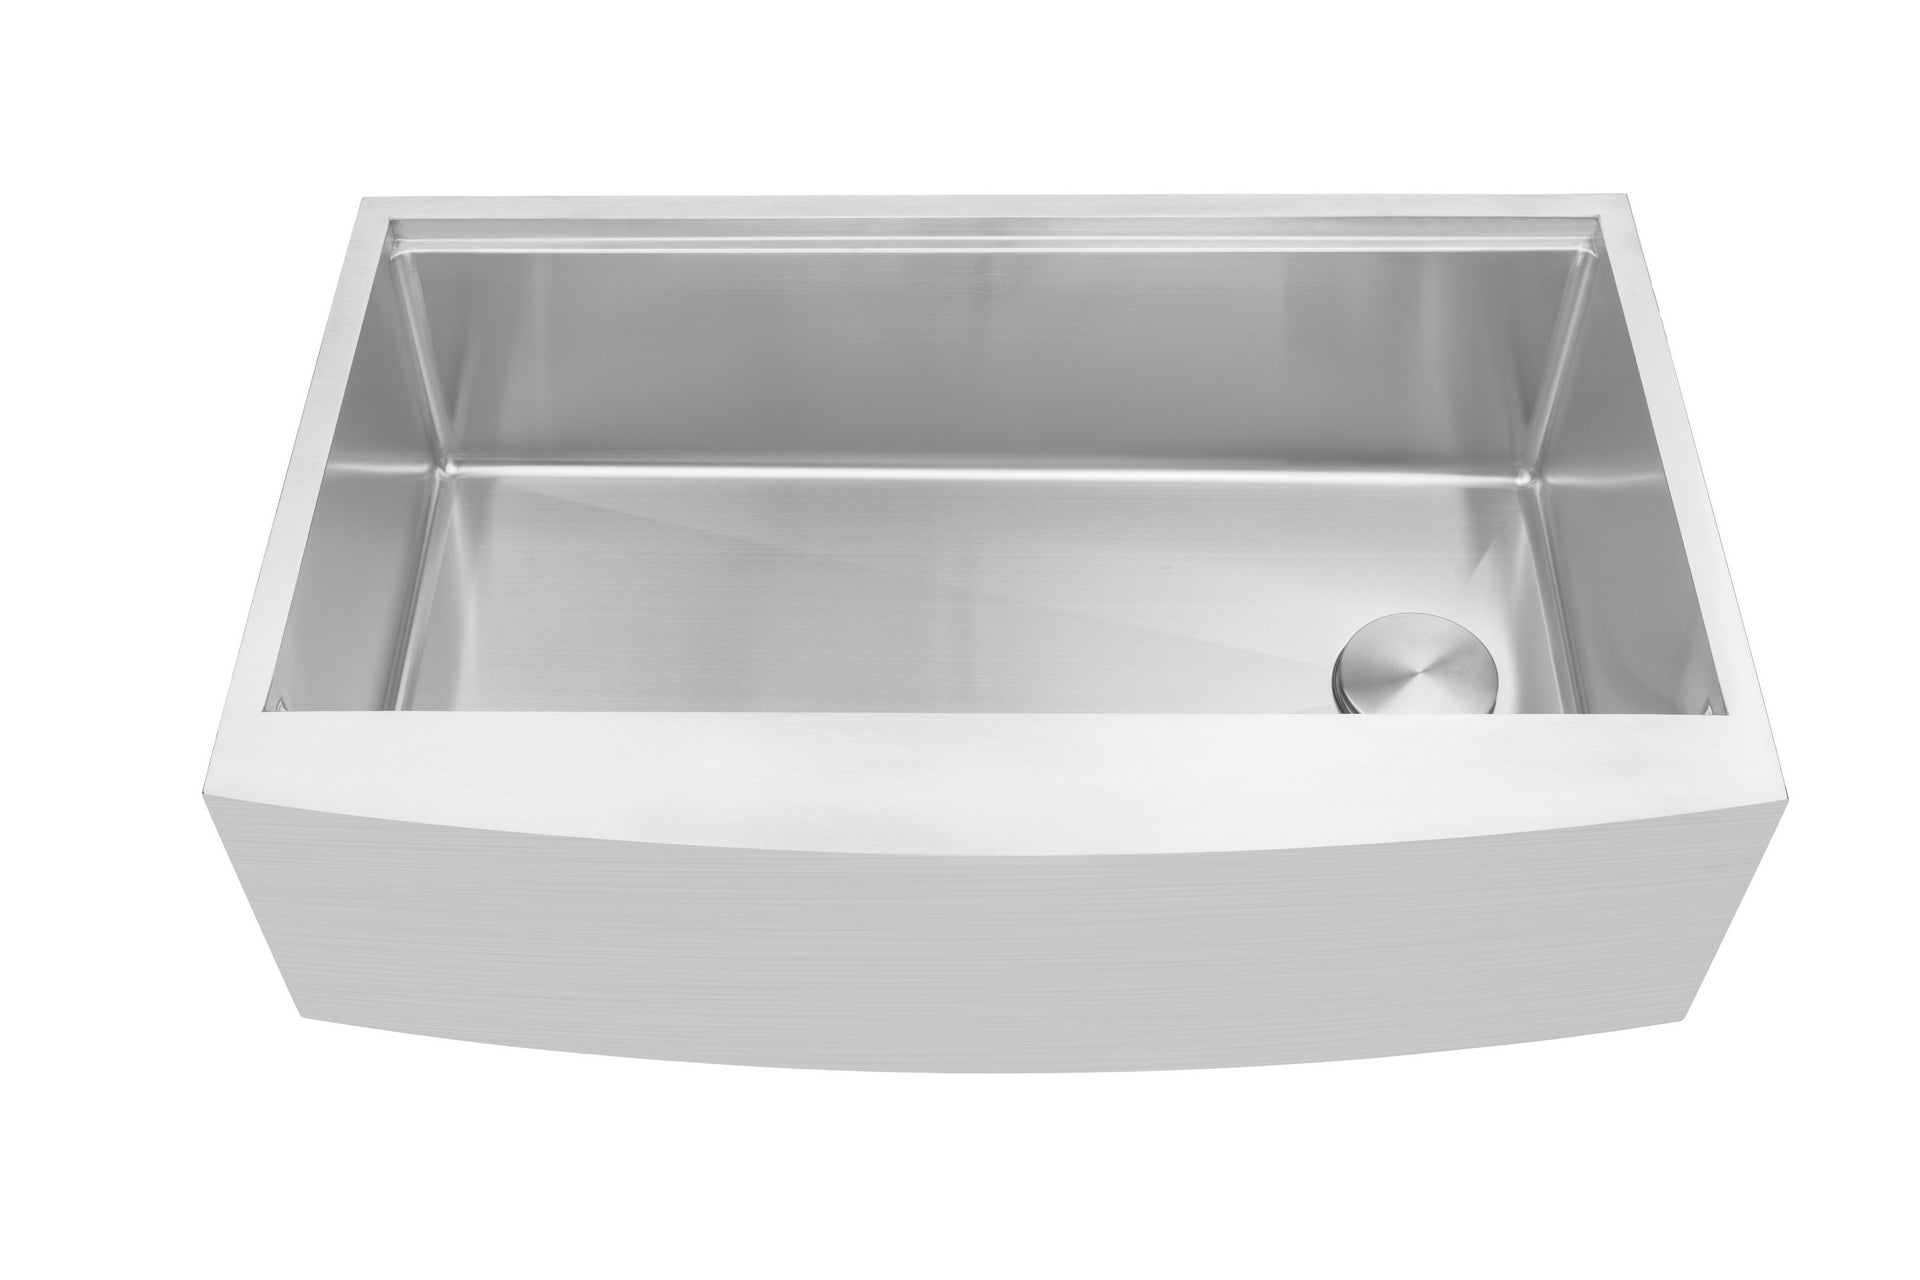 Workstation Farmhouse Apron Curve Front 16 Gauge  Stainless Steel Single Bowl Kitchen Sink w/ Integrated Ledge, 15mm Tight Radius w/ Premium Accessories